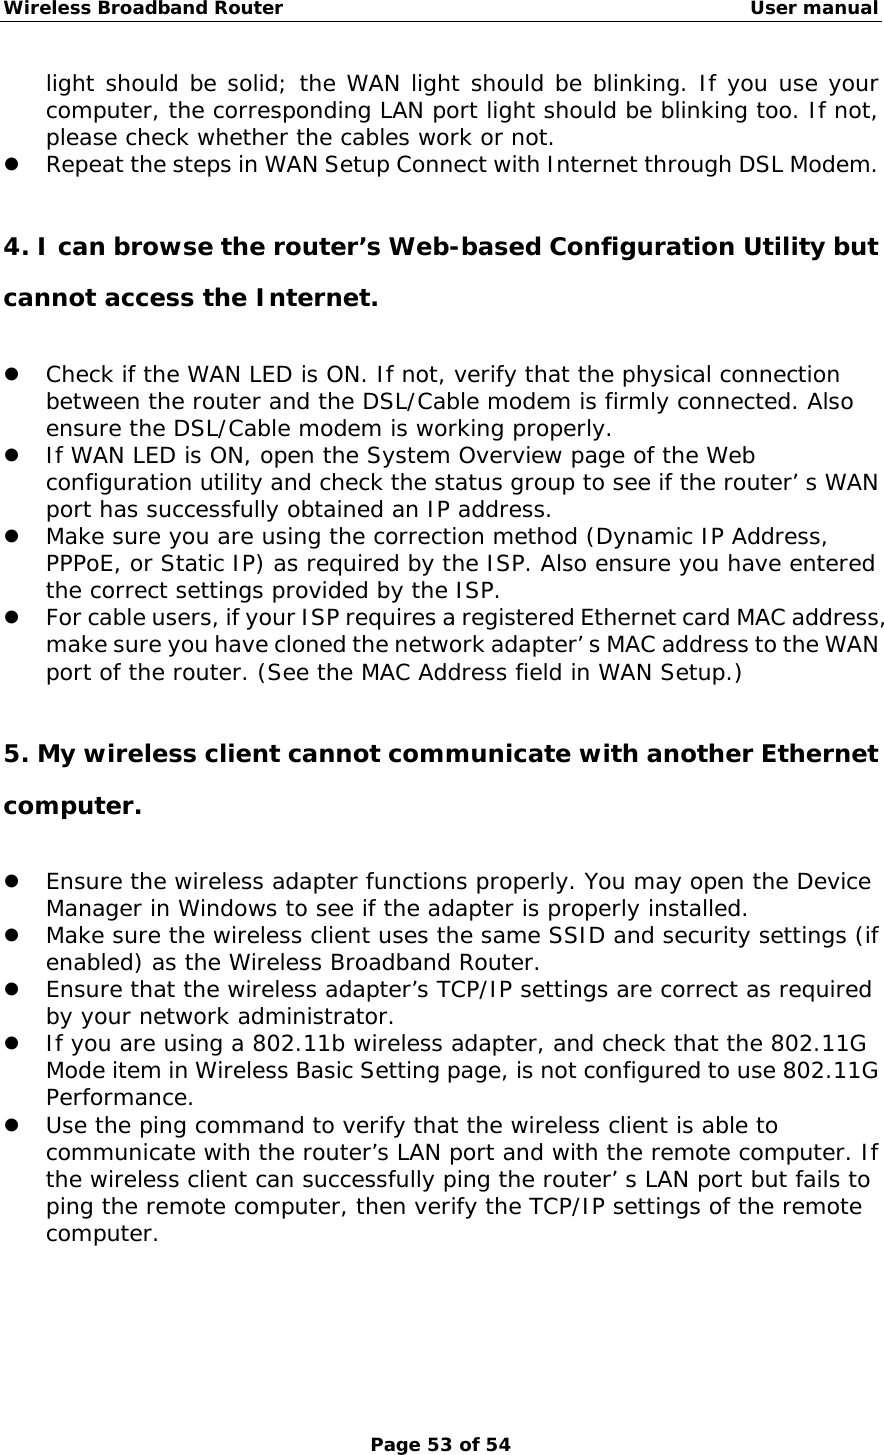 Wireless Broadband Router                                                   User manual Page 53 of 54 light should be solid; the WAN light should be blinking. If you use your computer, the corresponding LAN port light should be blinking too. If not, please check whether the cables work or not.  z Repeat the steps in WAN Setup Connect with Internet through DSL Modem.  4. I can browse the router’s Web-based Configuration Utility but cannot access the Internet. z Check if the WAN LED is ON. If not, verify that the physical connection between the router and the DSL/Cable modem is firmly connected. Also ensure the DSL/Cable modem is working properly. z If WAN LED is ON, open the System Overview page of the Web configuration utility and check the status group to see if the router’ s WAN port has successfully obtained an IP address. z Make sure you are using the correction method (Dynamic IP Address, PPPoE, or Static IP) as required by the ISP. Also ensure you have entered the correct settings provided by the ISP. z For cable users, if your ISP requires a registered Ethernet card MAC address, make sure you have cloned the network adapter’ s MAC address to the WAN port of the router. (See the MAC Address field in WAN Setup.)  5. My wireless client cannot communicate with another Ethernet computer. z Ensure the wireless adapter functions properly. You may open the Device Manager in Windows to see if the adapter is properly installed. z Make sure the wireless client uses the same SSID and security settings (if enabled) as the Wireless Broadband Router. z Ensure that the wireless adapter’s TCP/IP settings are correct as required by your network administrator. z If you are using a 802.11b wireless adapter, and check that the 802.11G Mode item in Wireless Basic Setting page, is not configured to use 802.11G Performance. z Use the ping command to verify that the wireless client is able to communicate with the router’s LAN port and with the remote computer. If the wireless client can successfully ping the router’ s LAN port but fails to ping the remote computer, then verify the TCP/IP settings of the remote computer. 